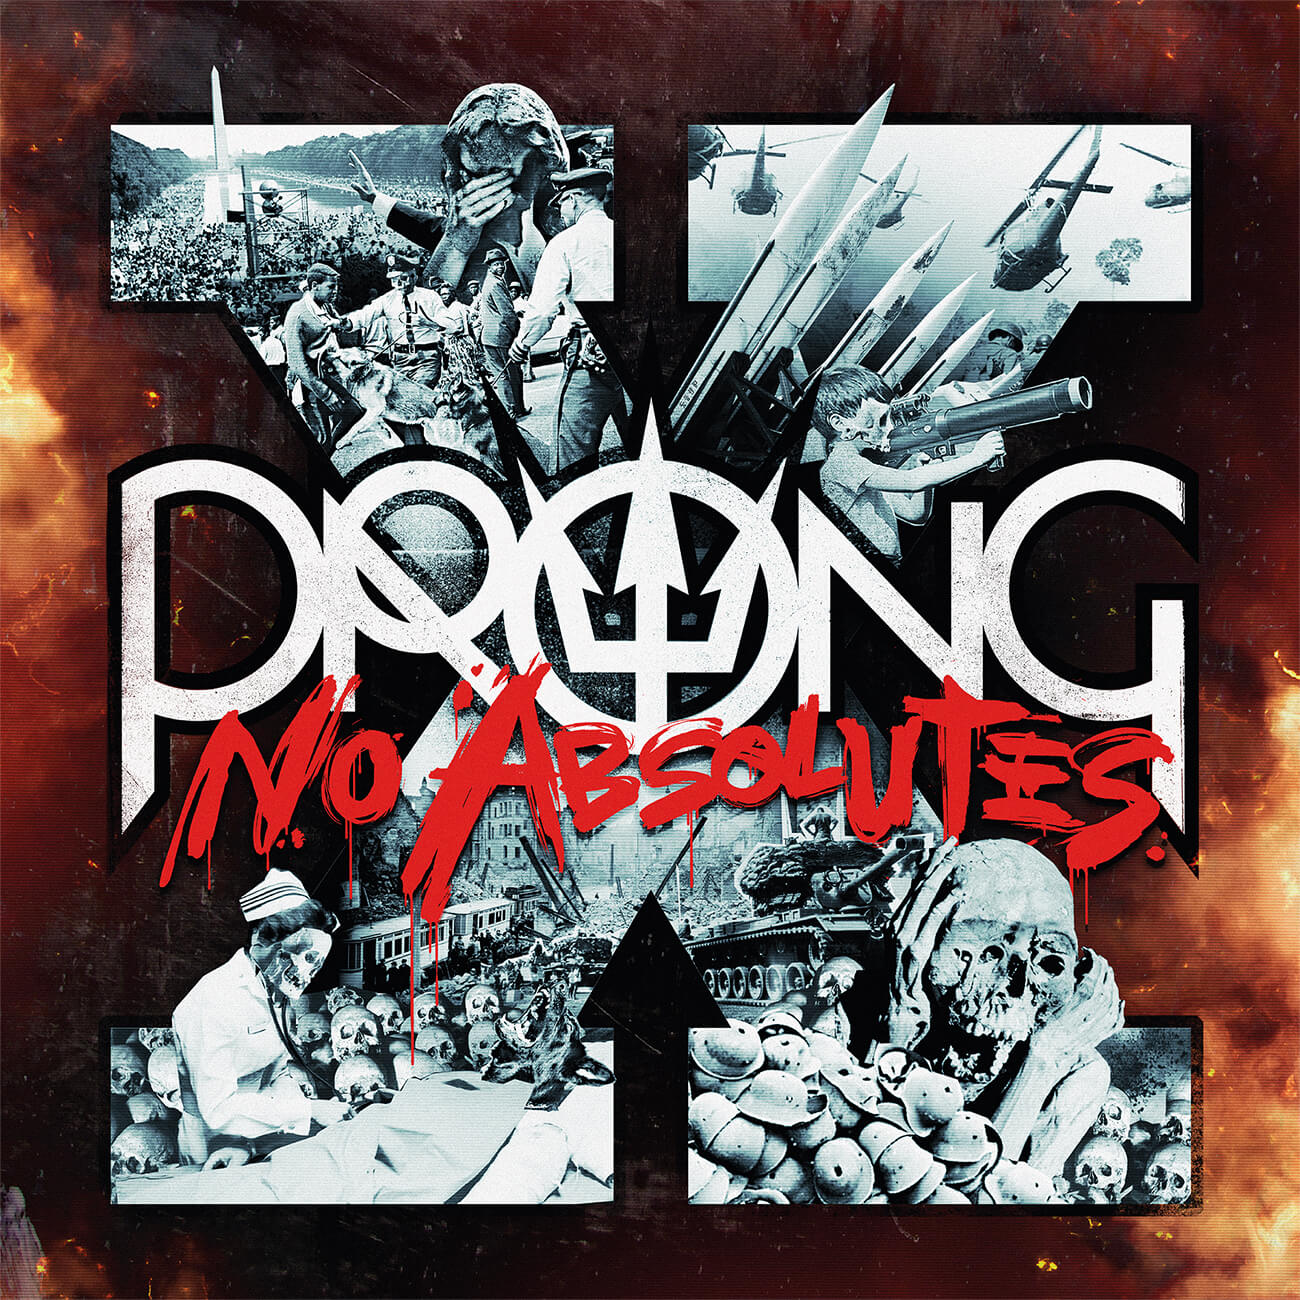 PRONG Confirm February 6, 2016 Release Date For New Album   X - No Absolutes Via SPV/Steamhammer